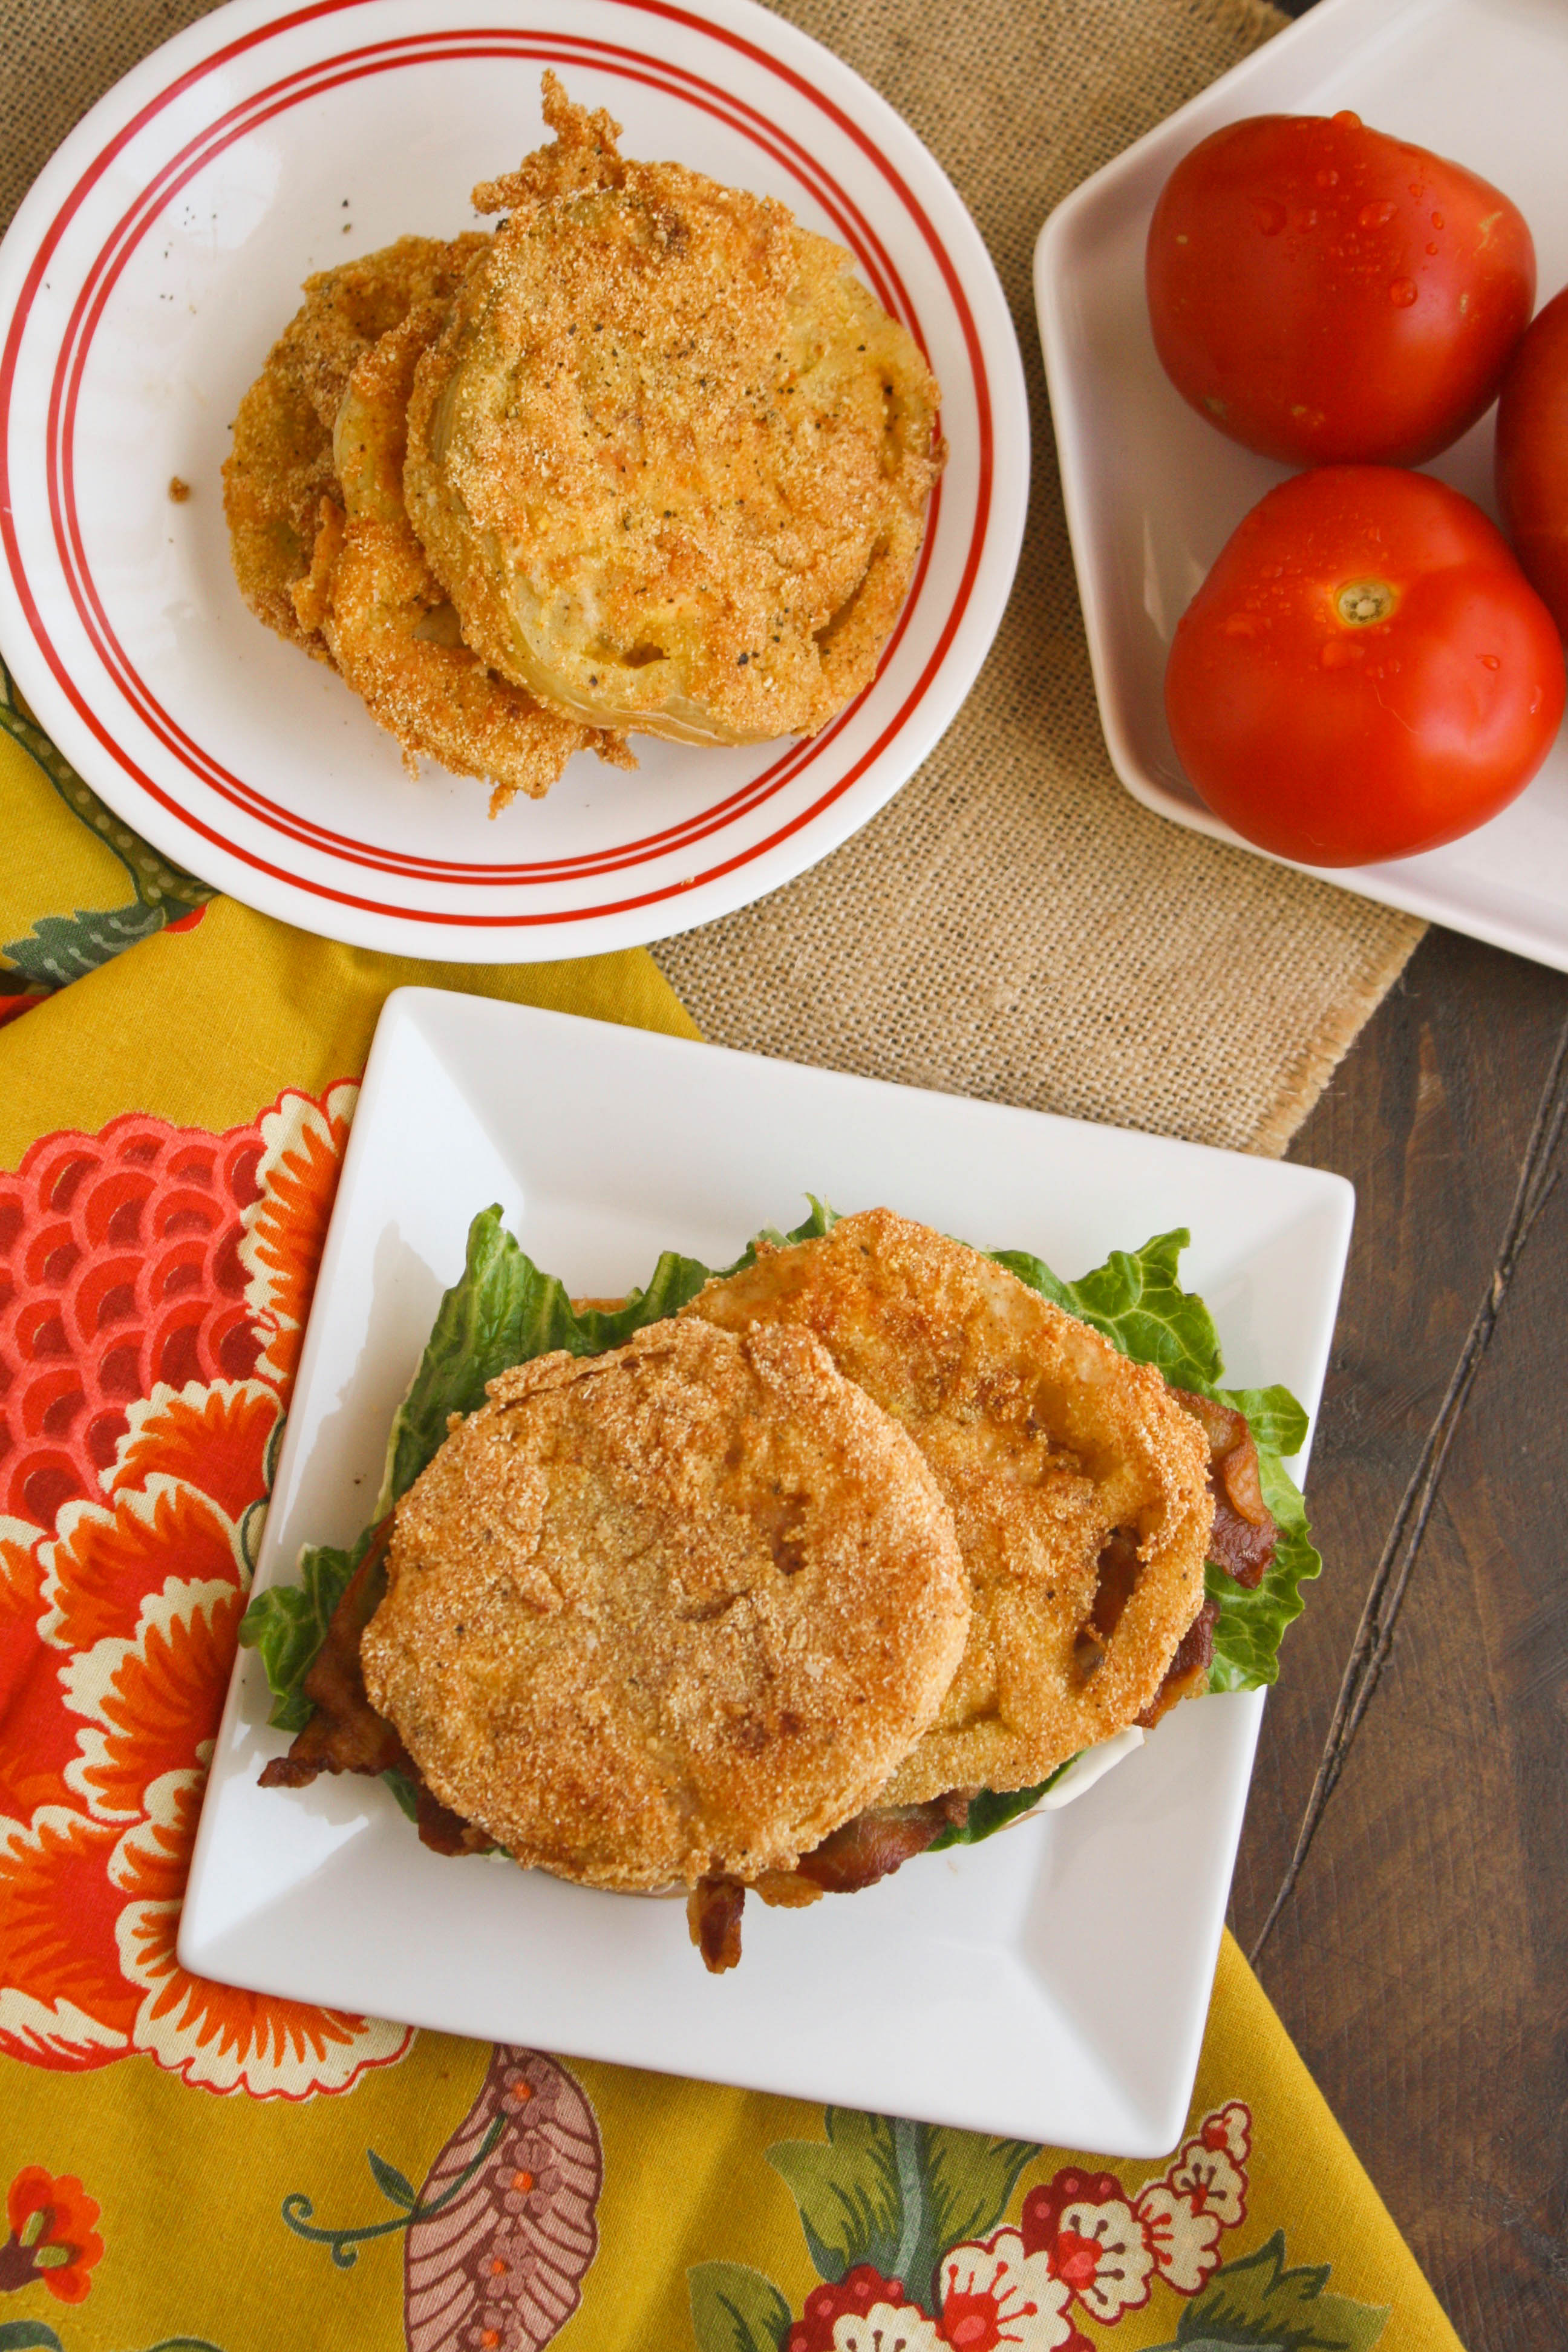 Fried Green Tomato BLT Sandwiches are delicious! You'll love this classic sandwich with tasty ingredients.